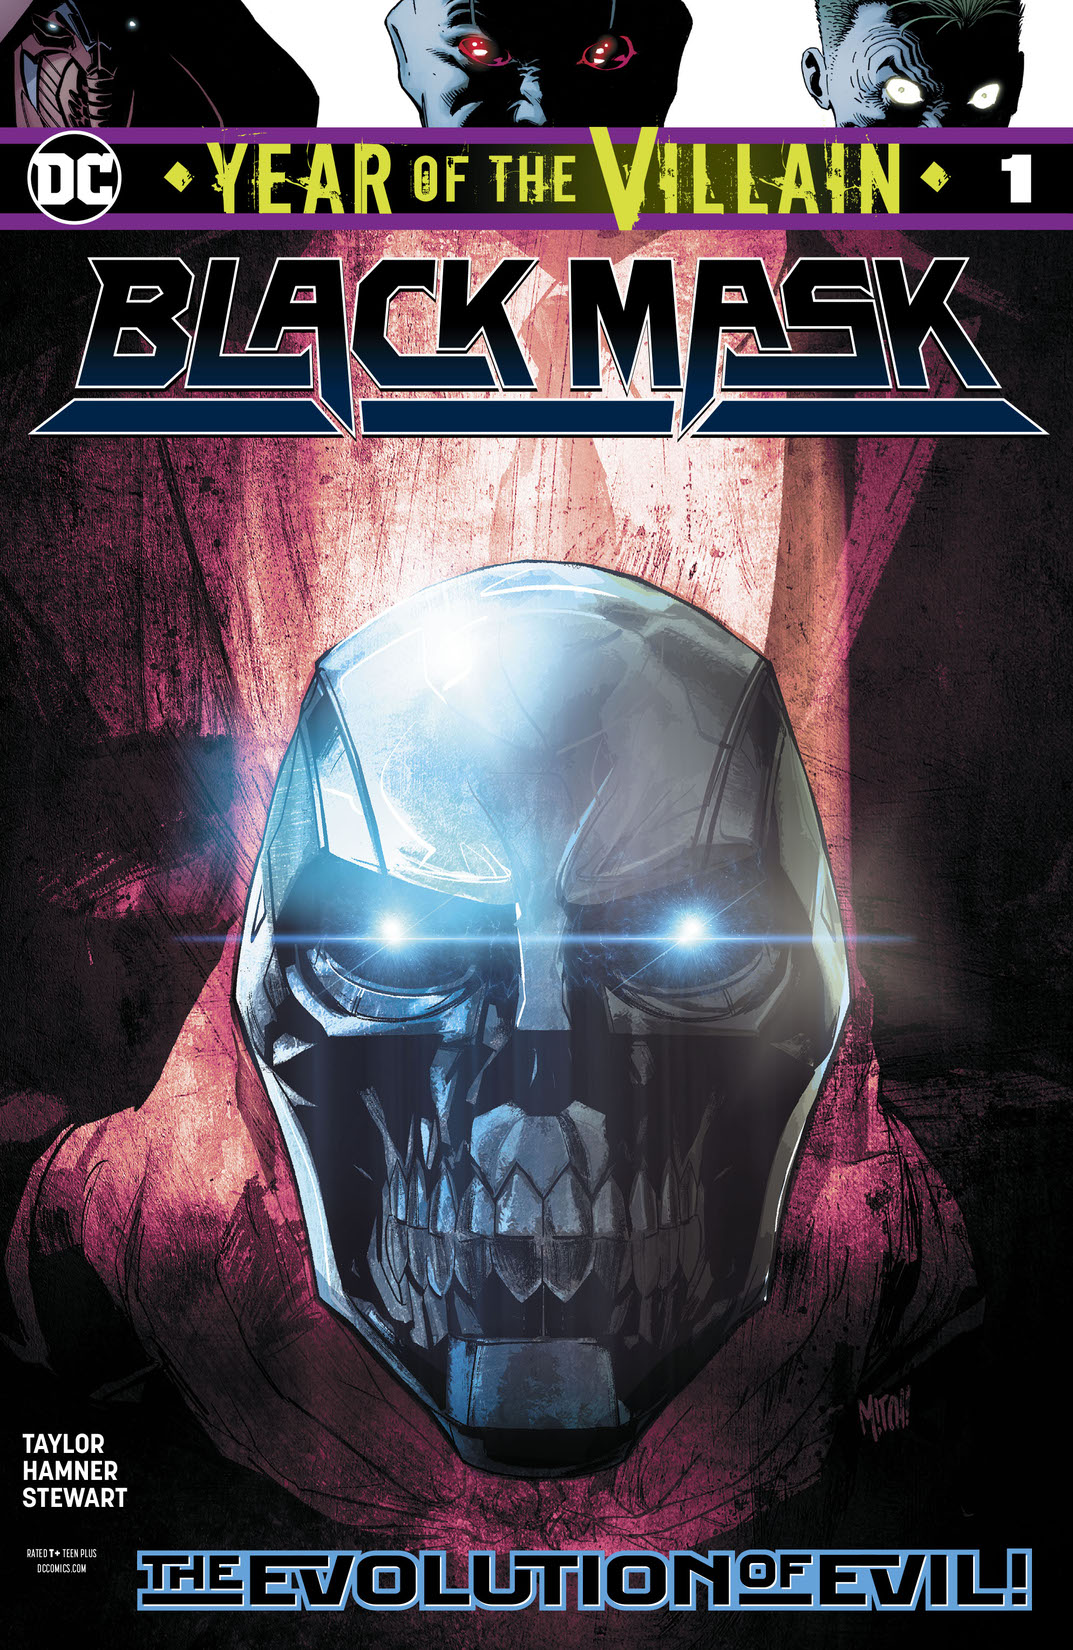 Black Mask: Year of the Villain #1 preview images